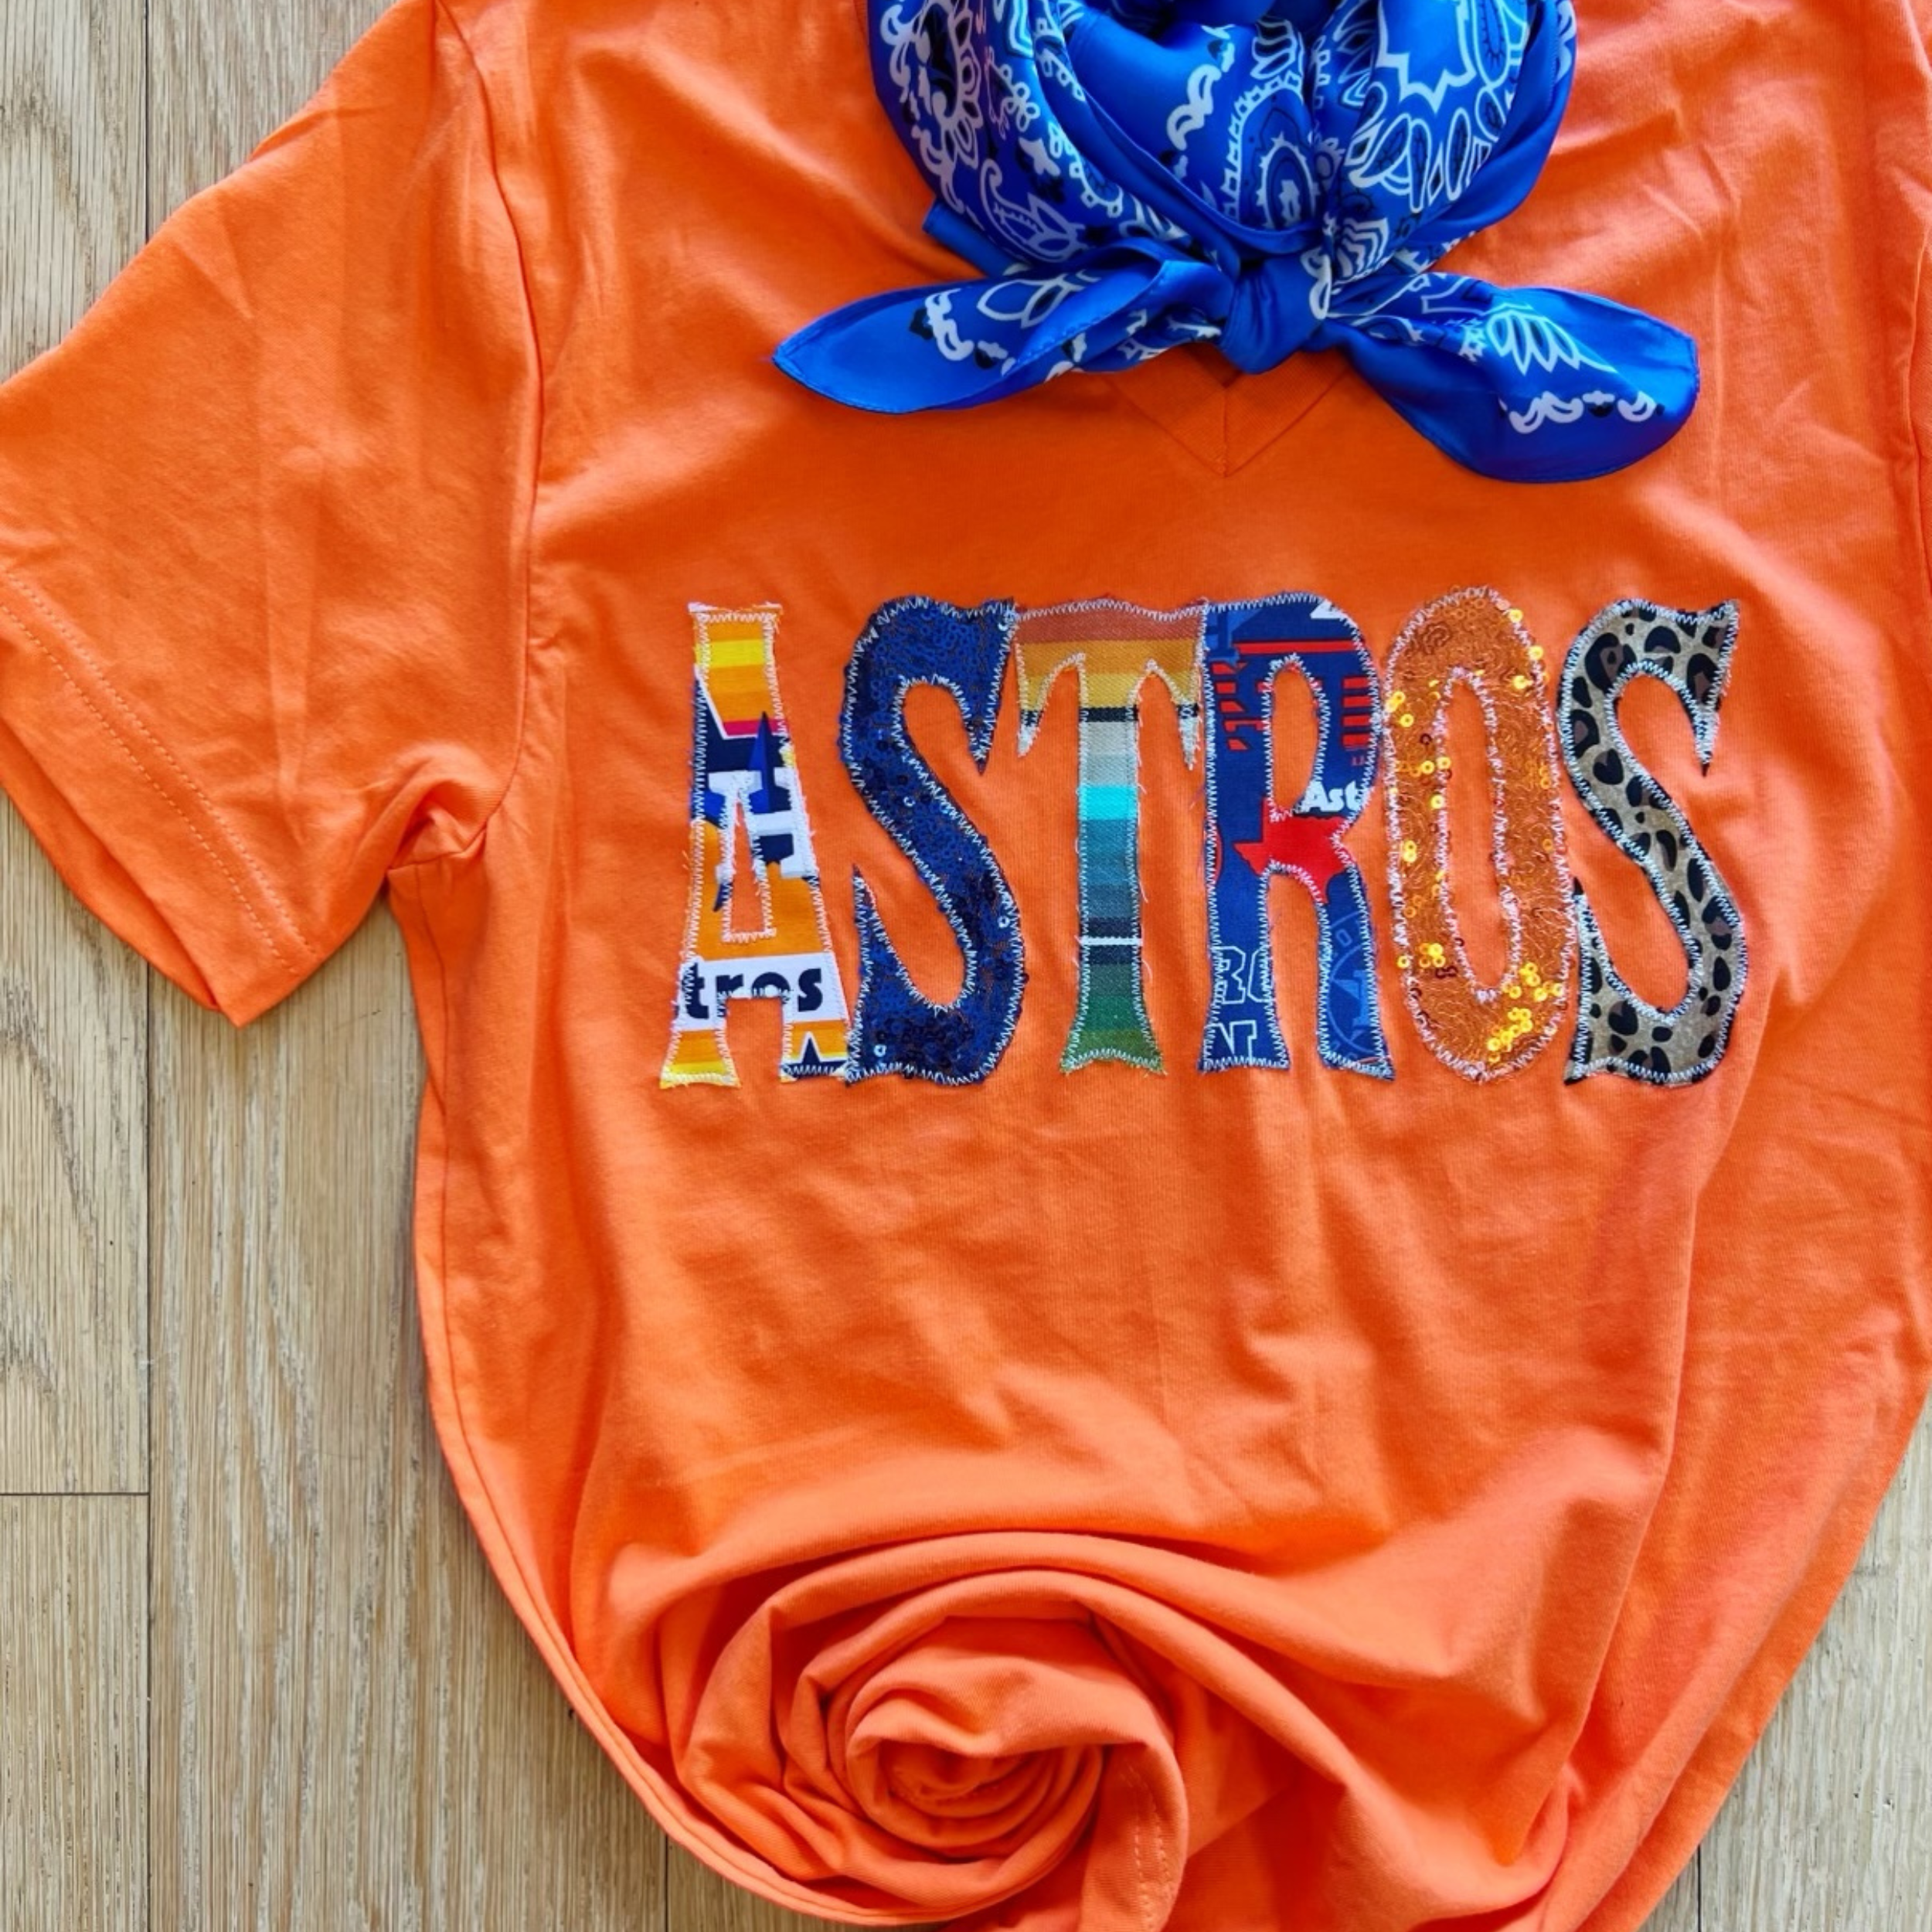 An orange graphic tee with short sleeves, a v neckline, and mix print patch letters that spell "ASTROS." This tee is pictured on a wooden background with a blue bandana. 